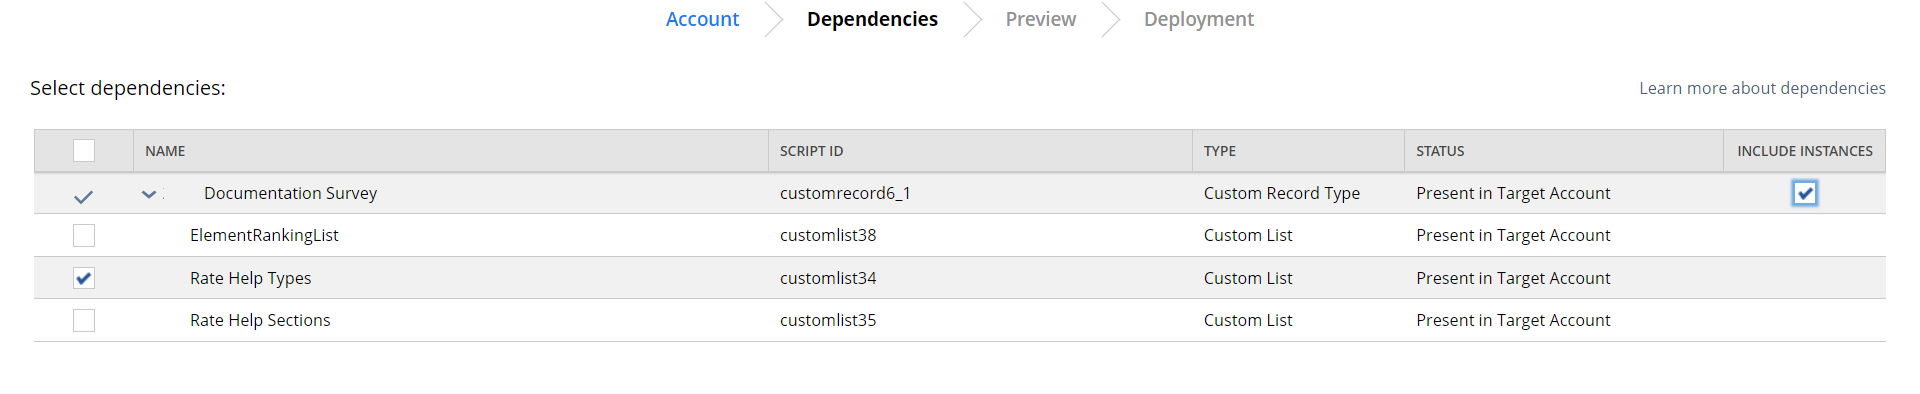 Selecting dependencies to copy on Using Copy to Account page.